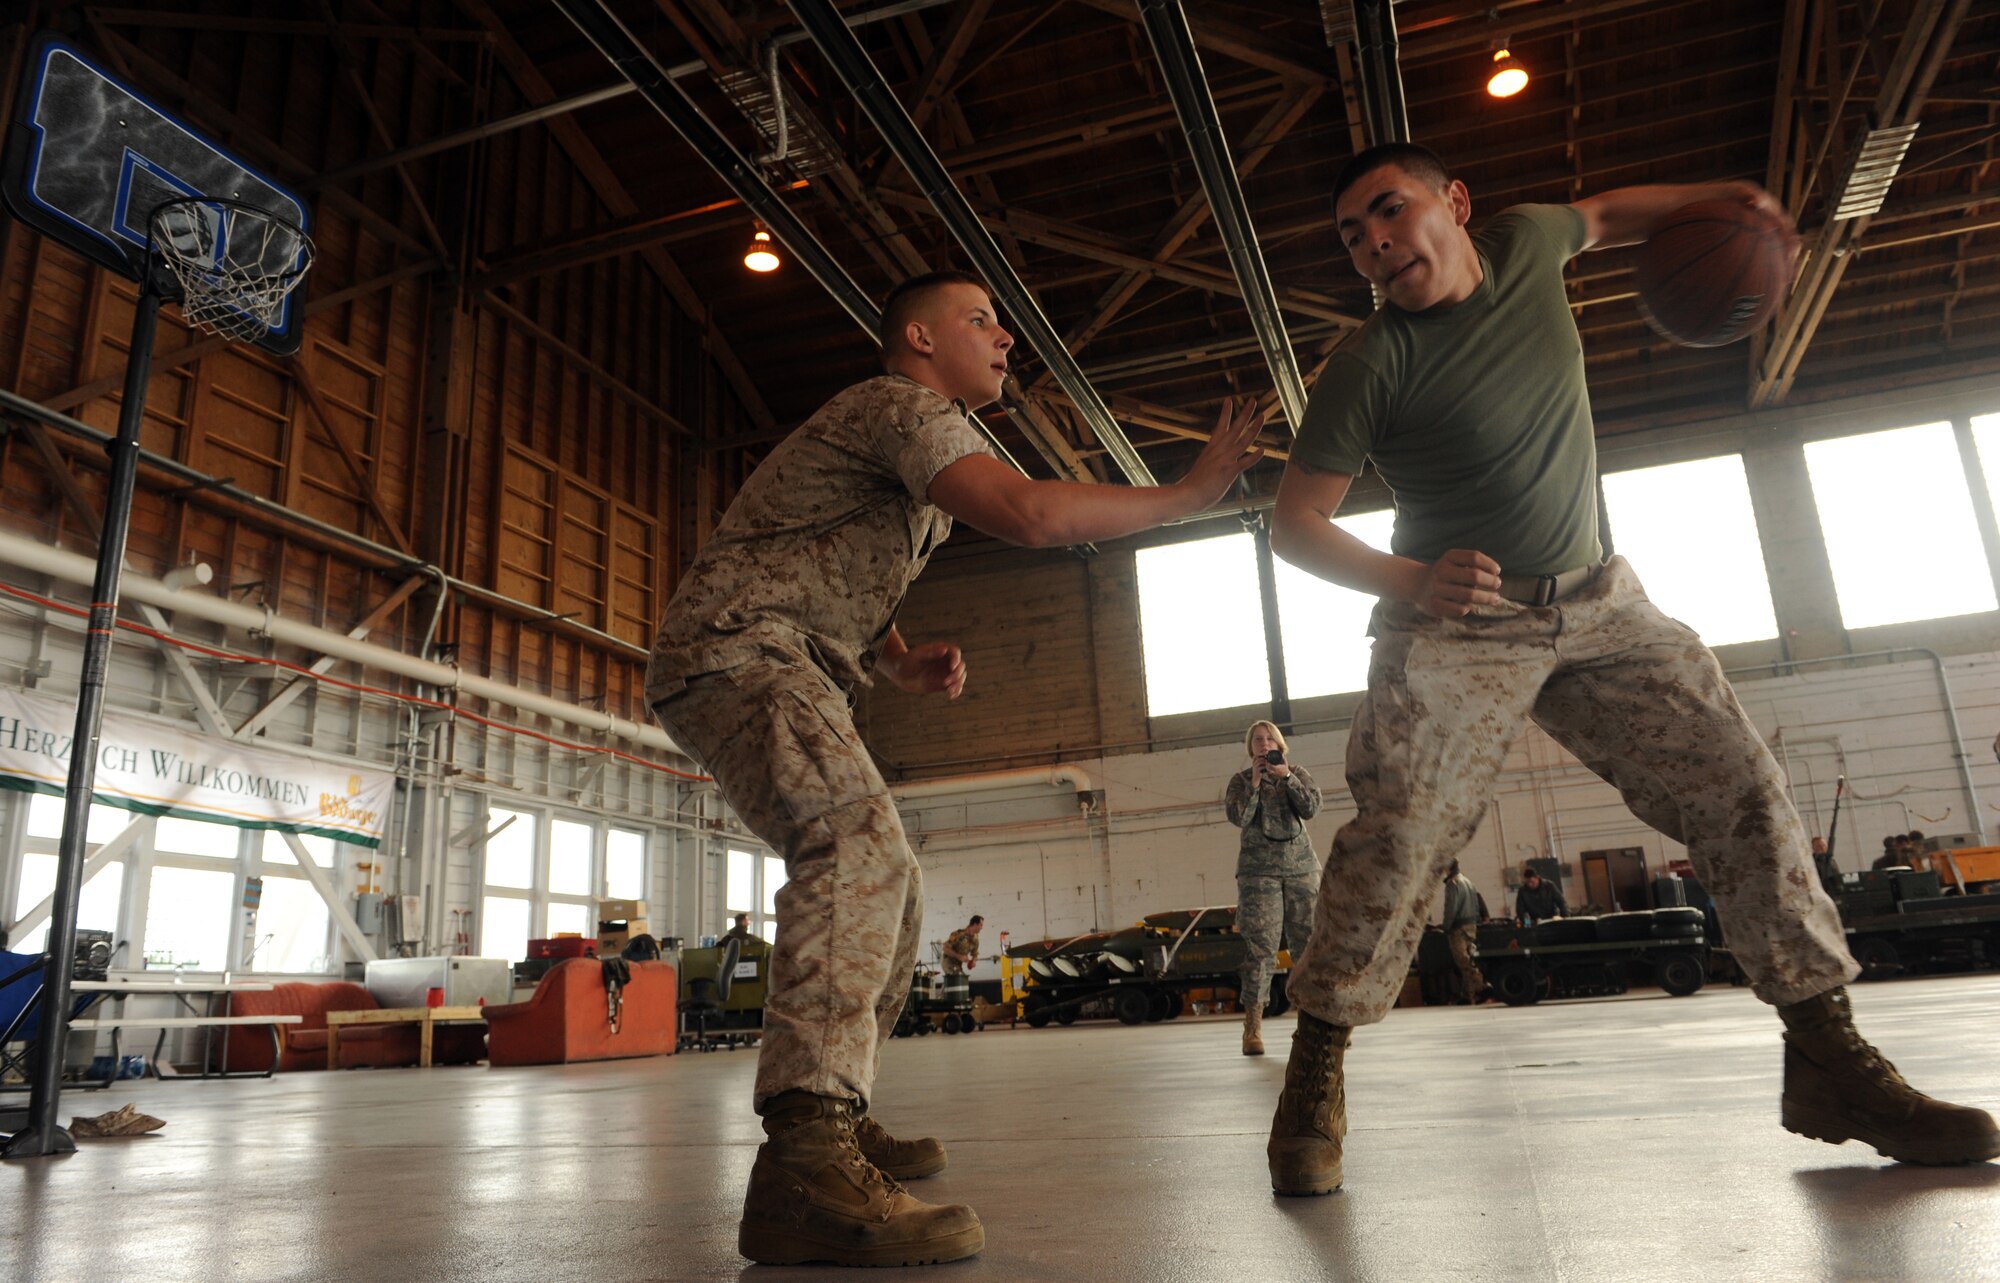 MOUNTAIN HOME AIR FORCE BASE, Idaho -- Lance Cpl. James Rosser (left) and Lance Cpl. Todd Minton, 314th Marine Fighter Attack Squadron aviation ordinances from Mirmar Air Base, Calif., play basketball on their break in hangar 201 here Oct. 28. The 314th VMFA is participating in the Mountain Roundup Exercise. Mountain Roundup is a large-force exercise running from Oct. 12 to  29 that includes participants from the German air force and U.S. Air Force, Navy and Marine Corps. (U.S. Air Force photo by Senior Airman Debbie Lockhart)